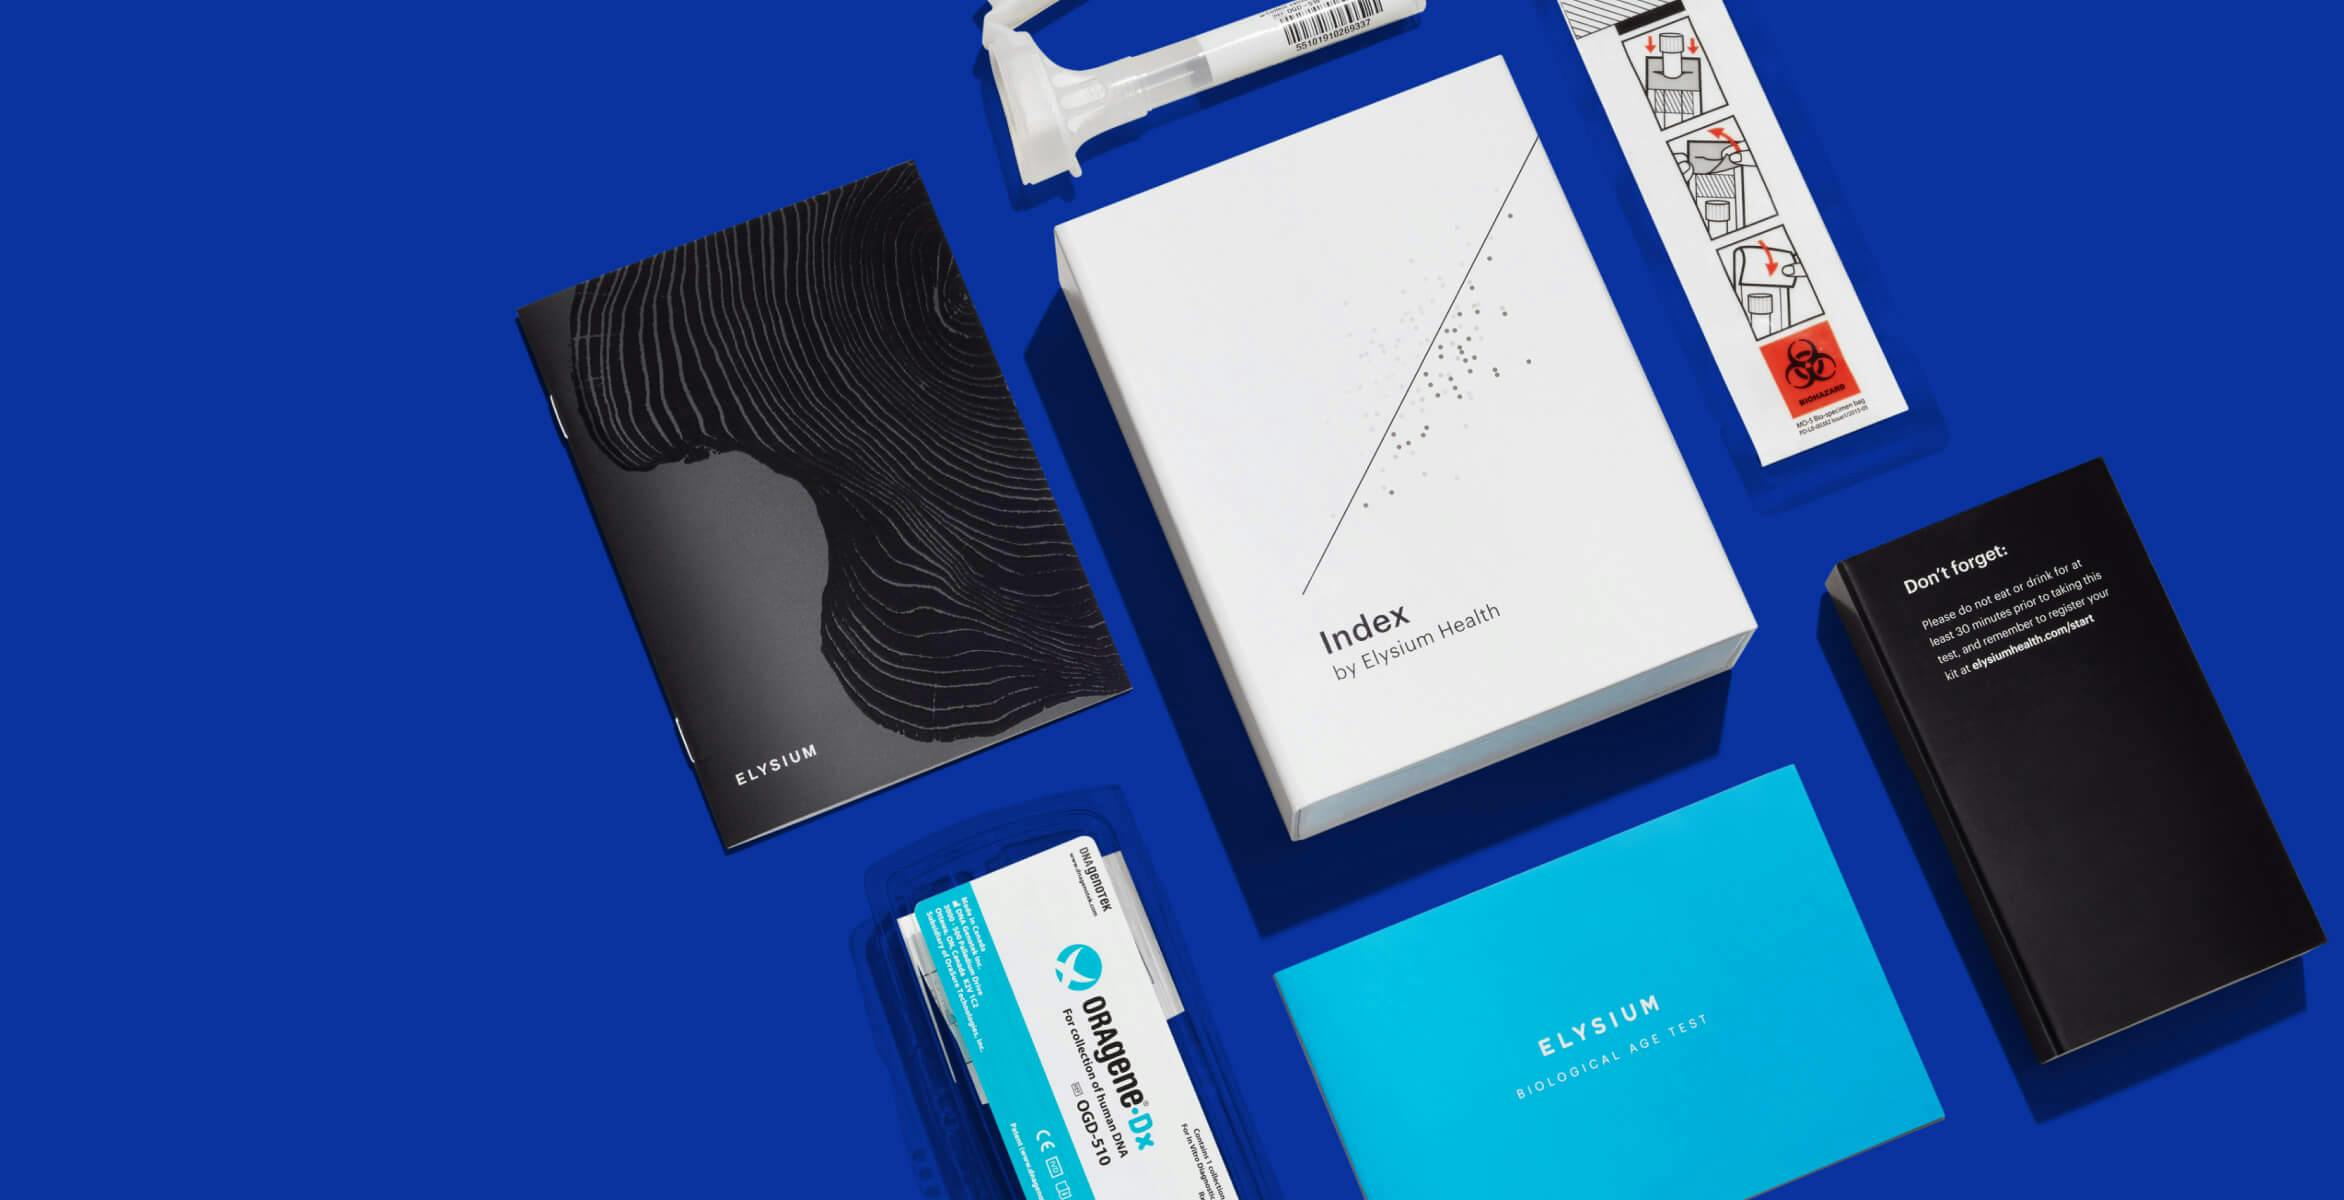 Index: Biological age kit, packaging design, experience design, luxury product